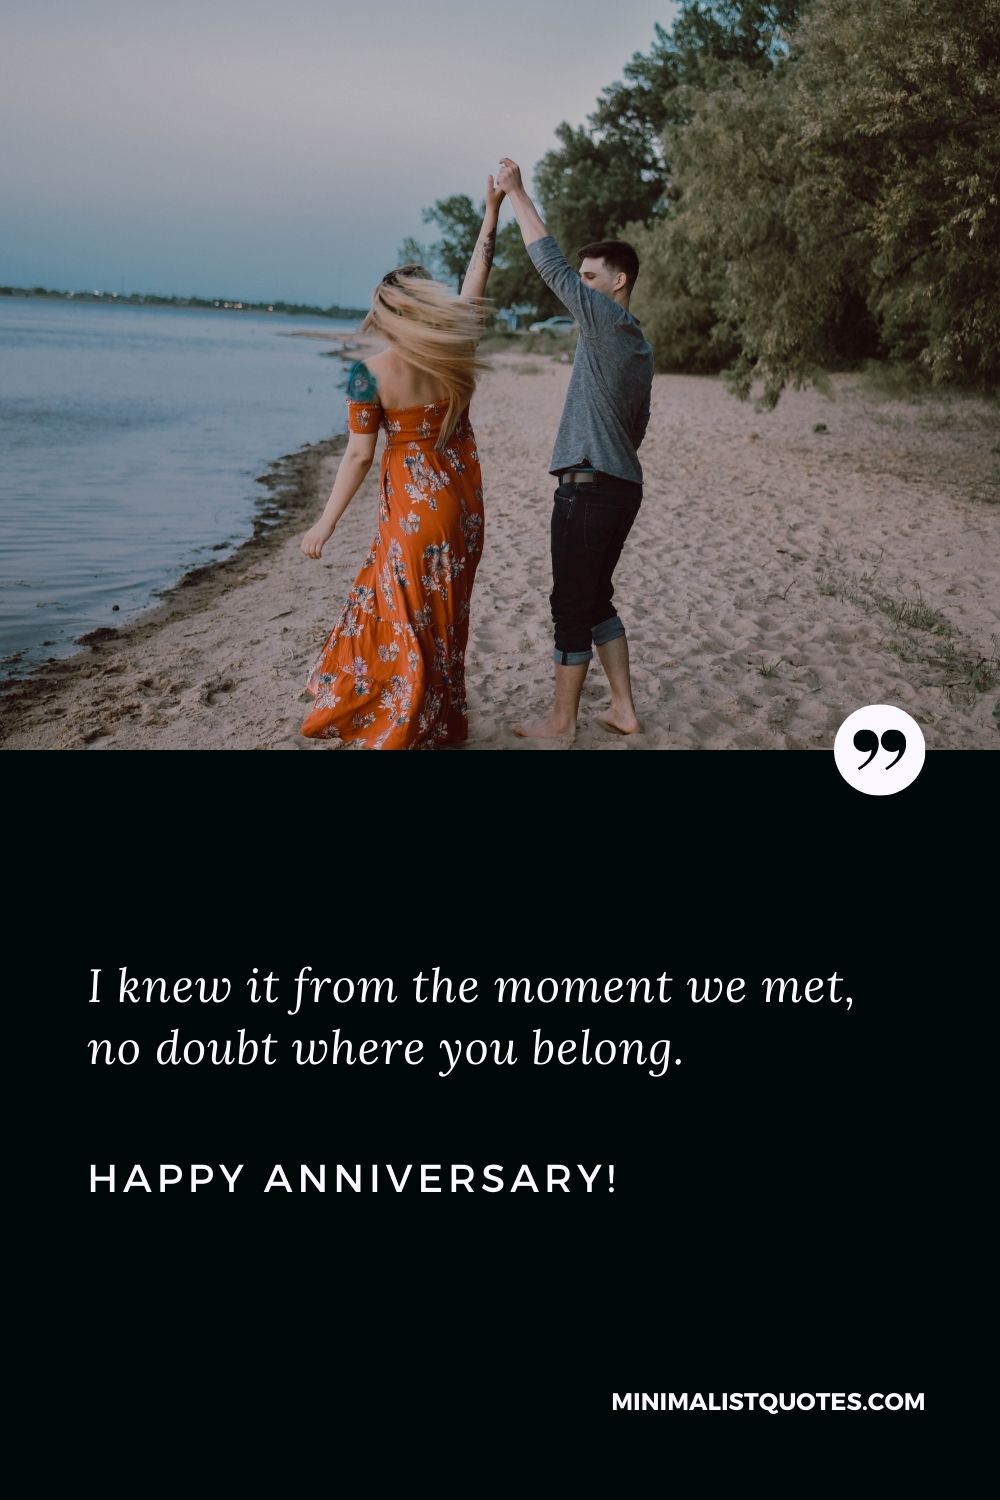 Anniversary quotes for wife: I knew it from the moment we met, no doubt where you belong. Happy Anniversary!